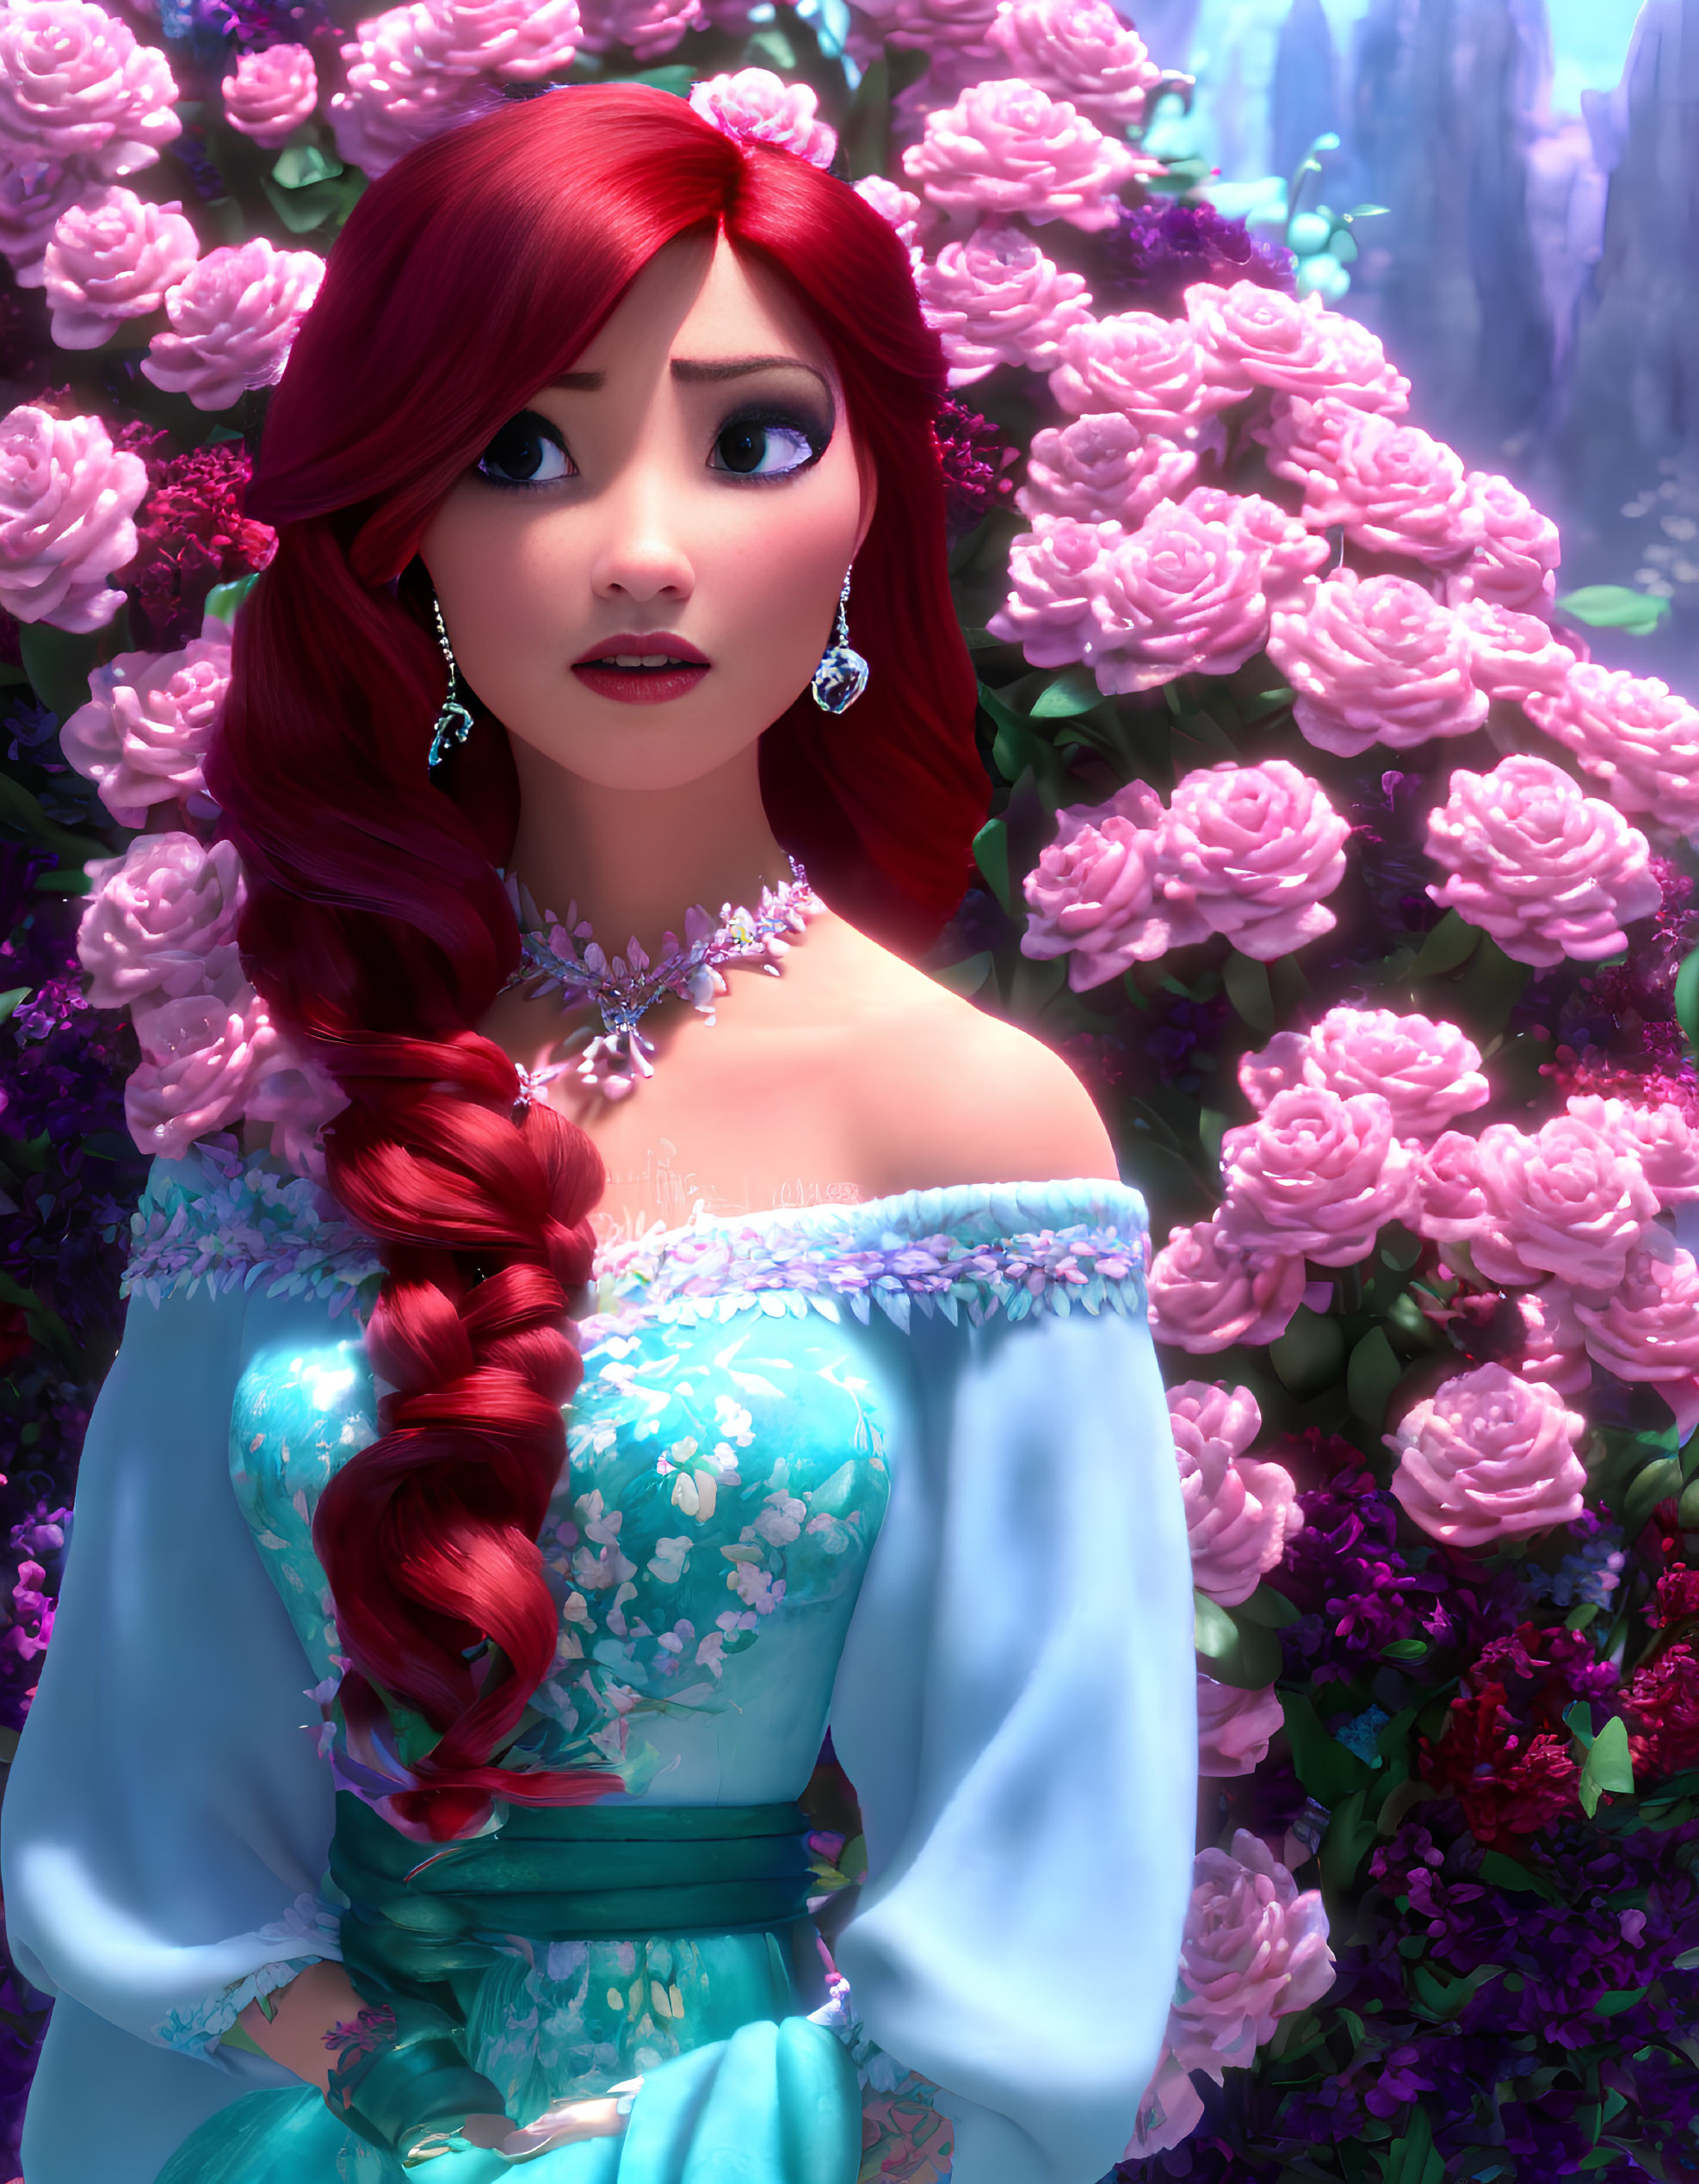 Red Braided Hair Female Character in Turquoise Dress with Silver Jewelry and Pink Roses